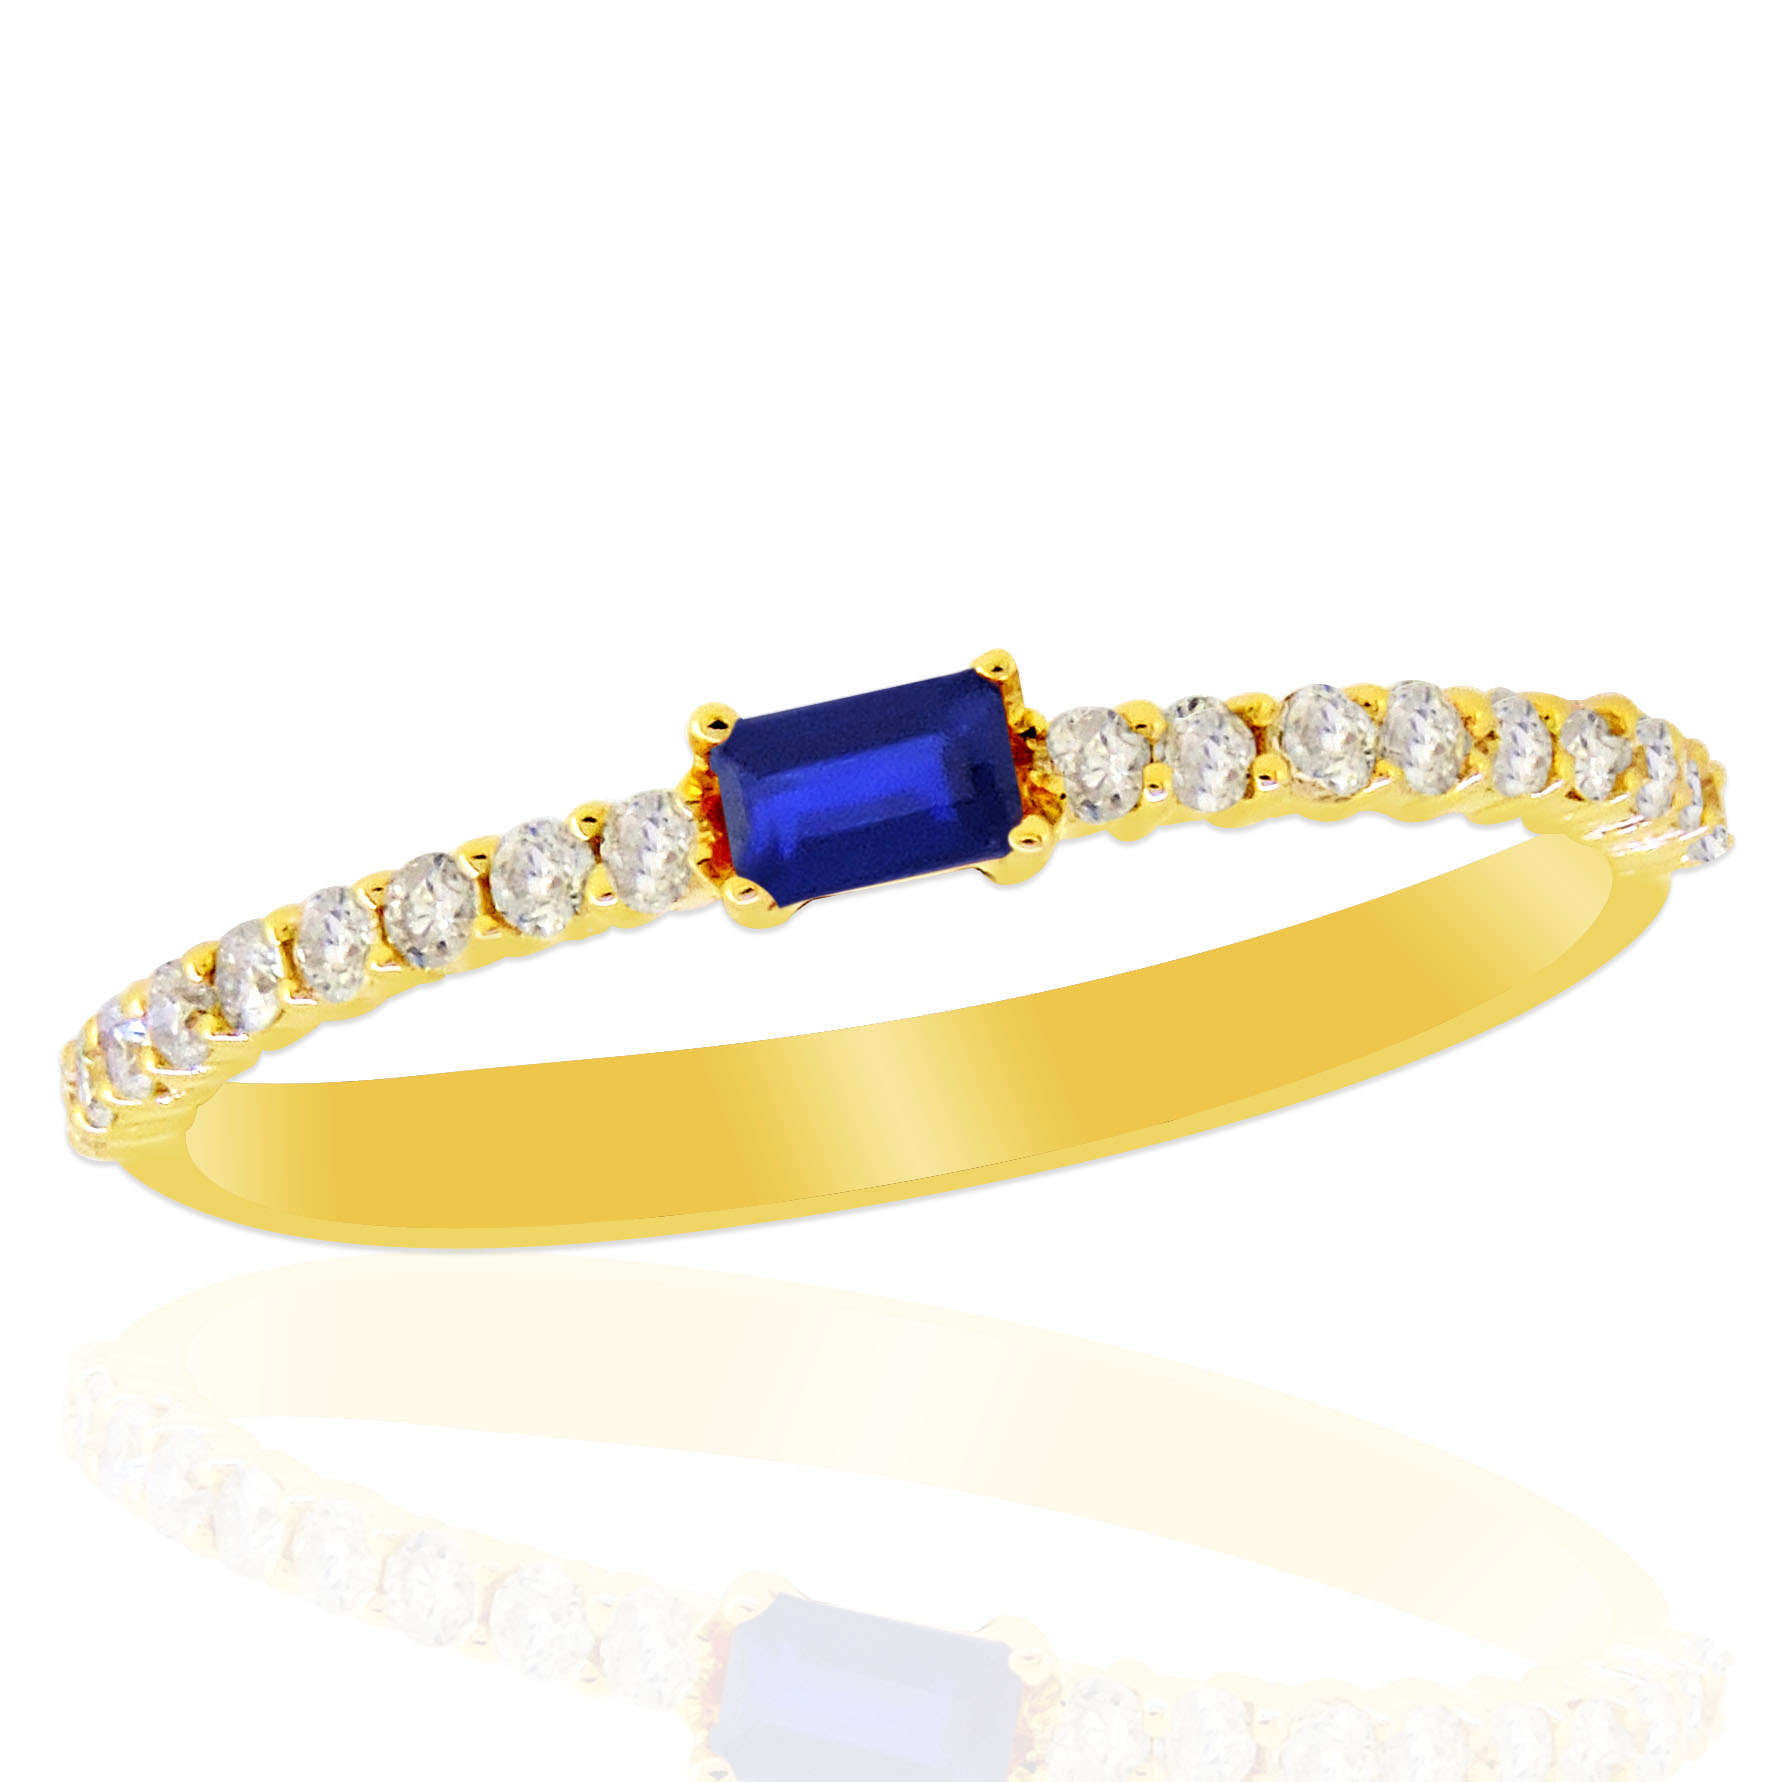 The ring contains 1 baguette cut sapphire prong set in the center with 9 full cut diamonds prong set on either side of center. Blue sapphire approximately = .12ctw. 18 diamonds approximately = .18